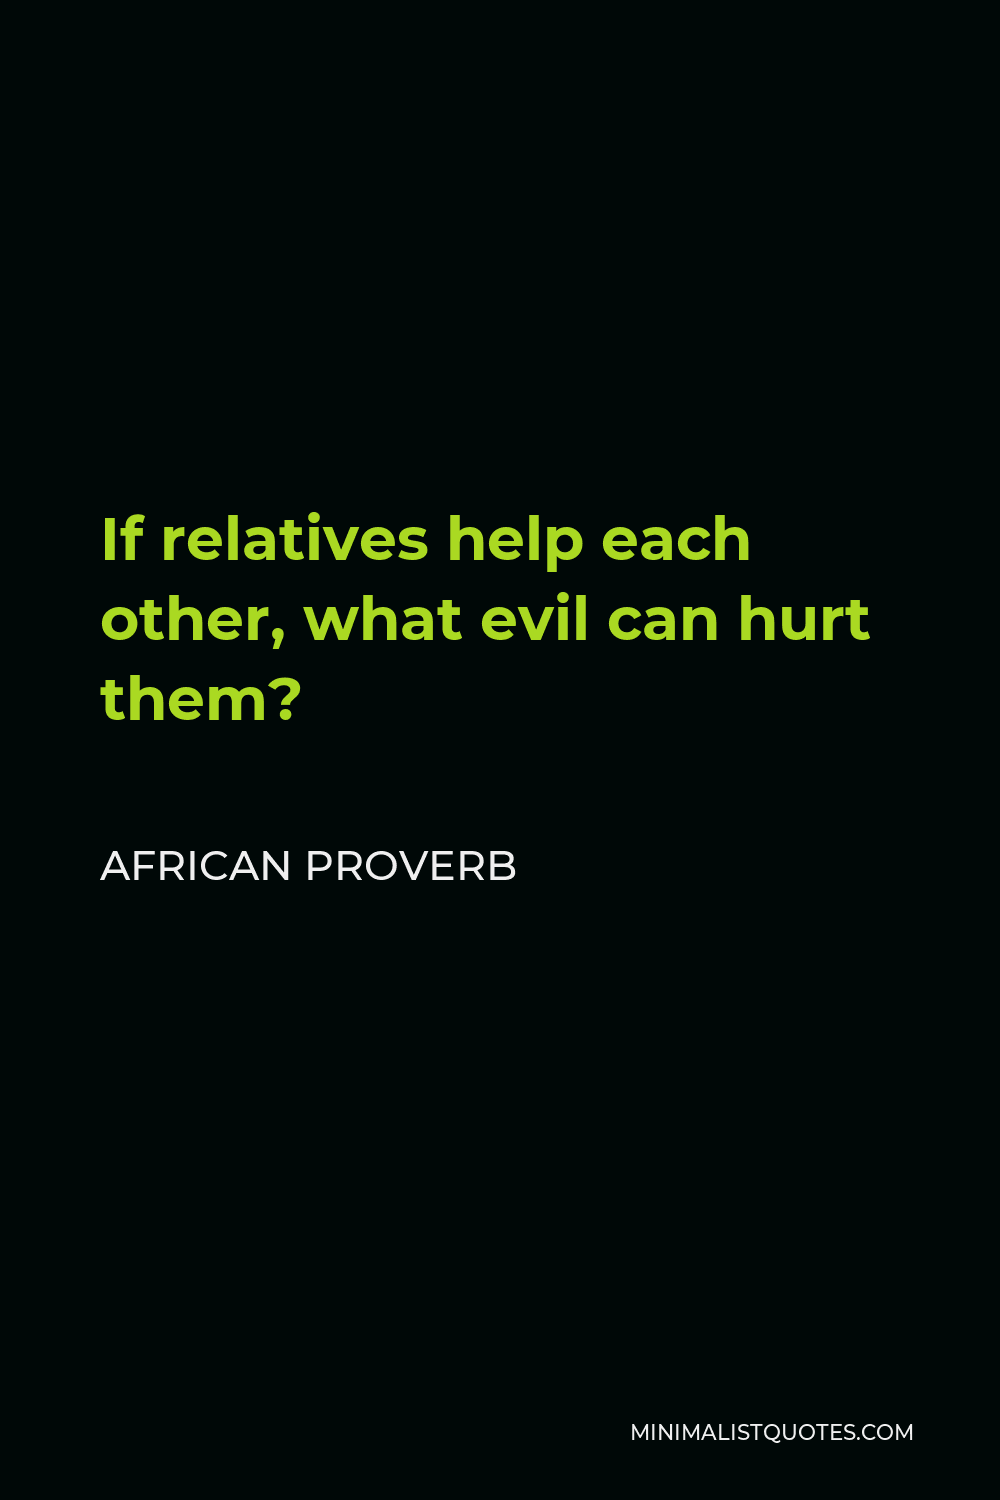 African Proverb Quote - If relatives help each other, what evil can hurt them?